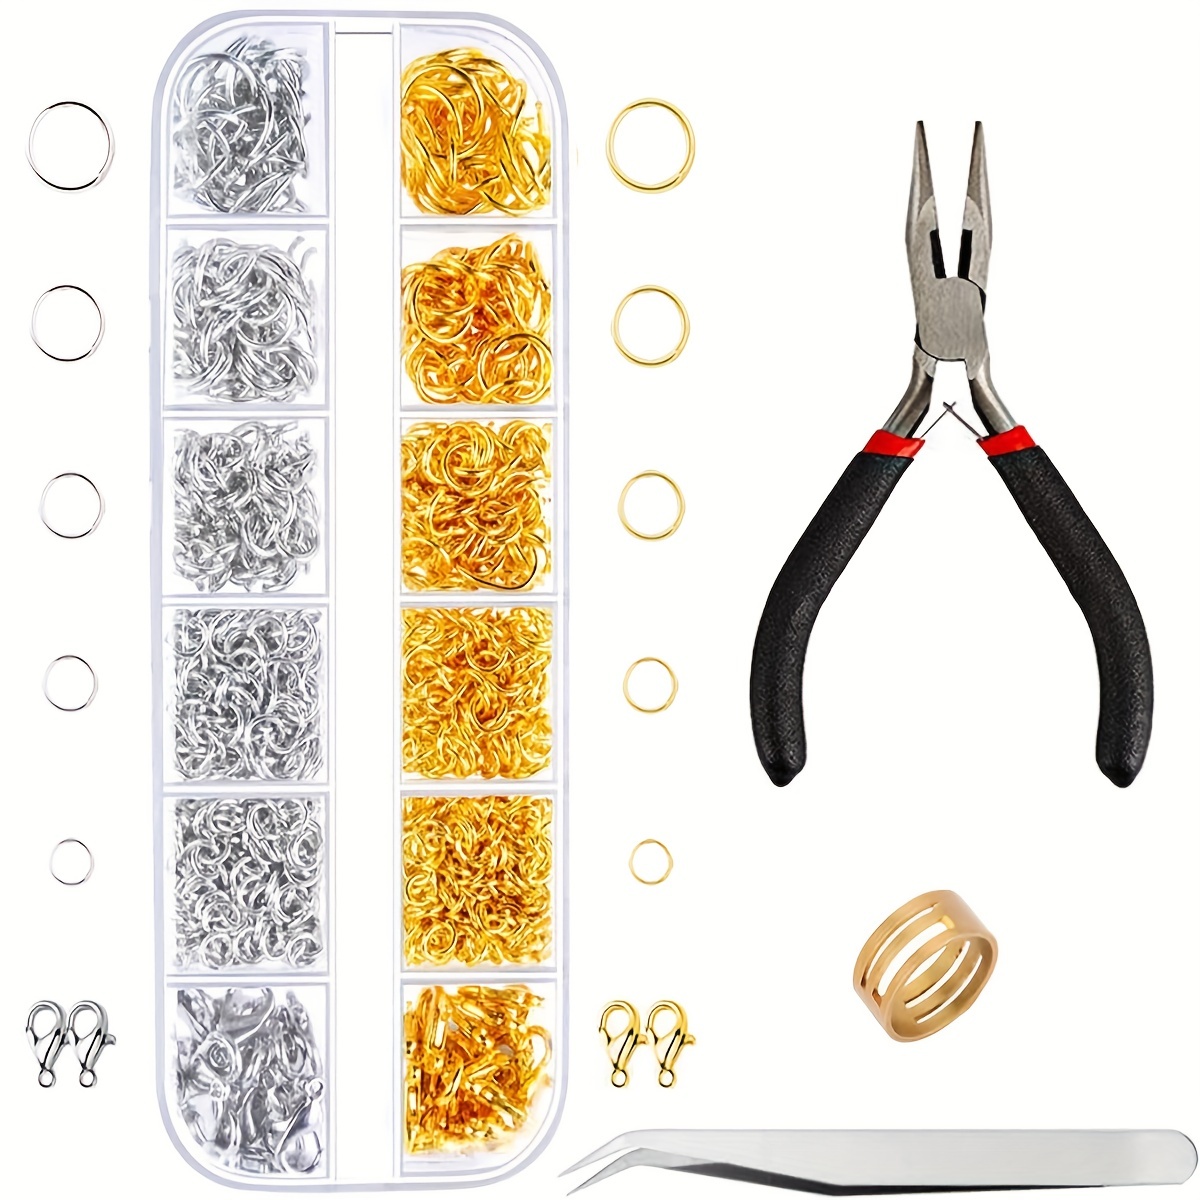 Jewelry Making Repair Kit with Jewelry Jump Rings Lobster Clasps 3